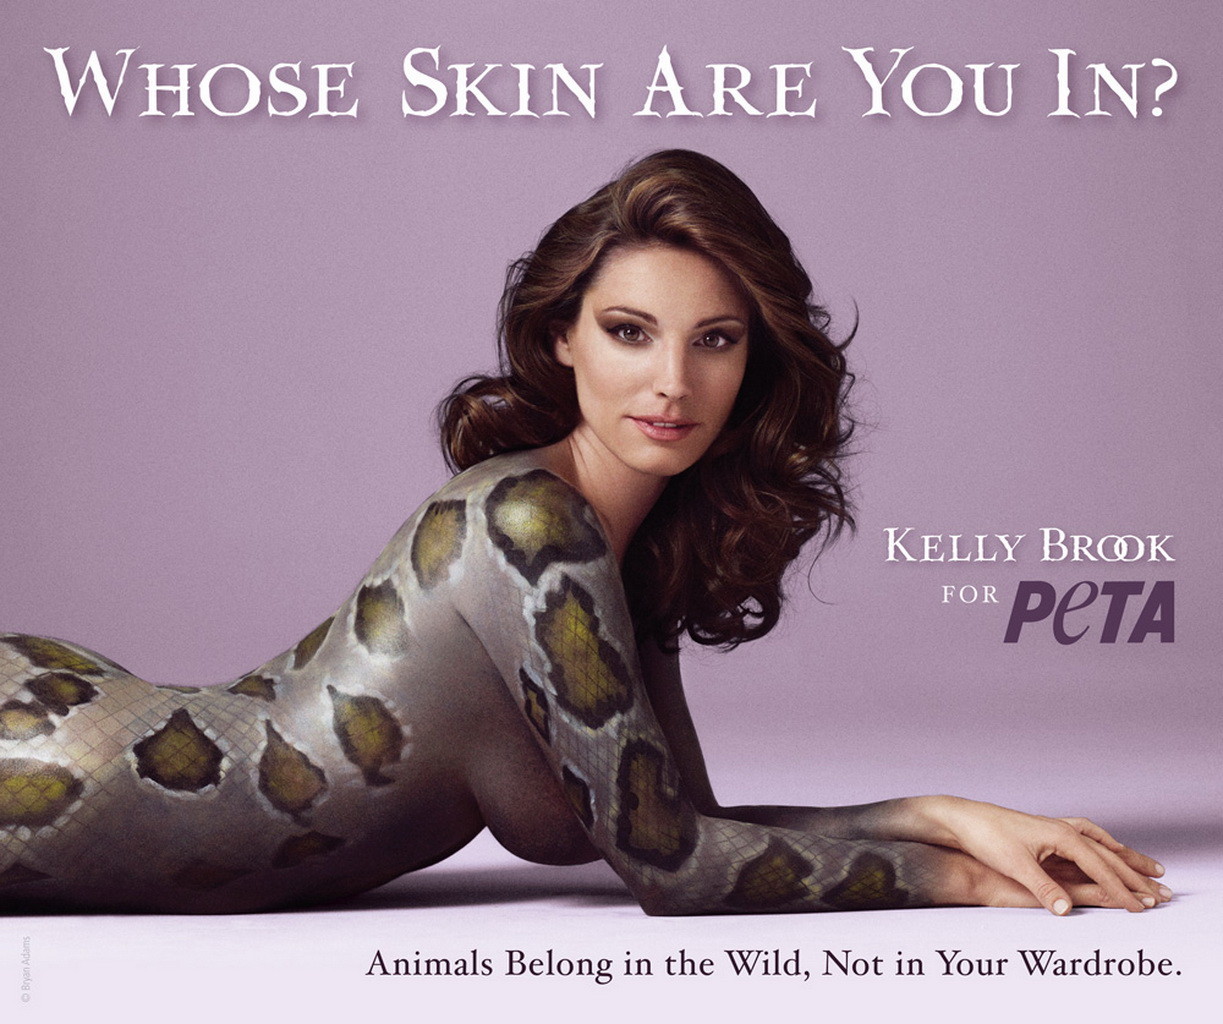 Kelly brook nude body painted for new peta ad campaign
 #75288204